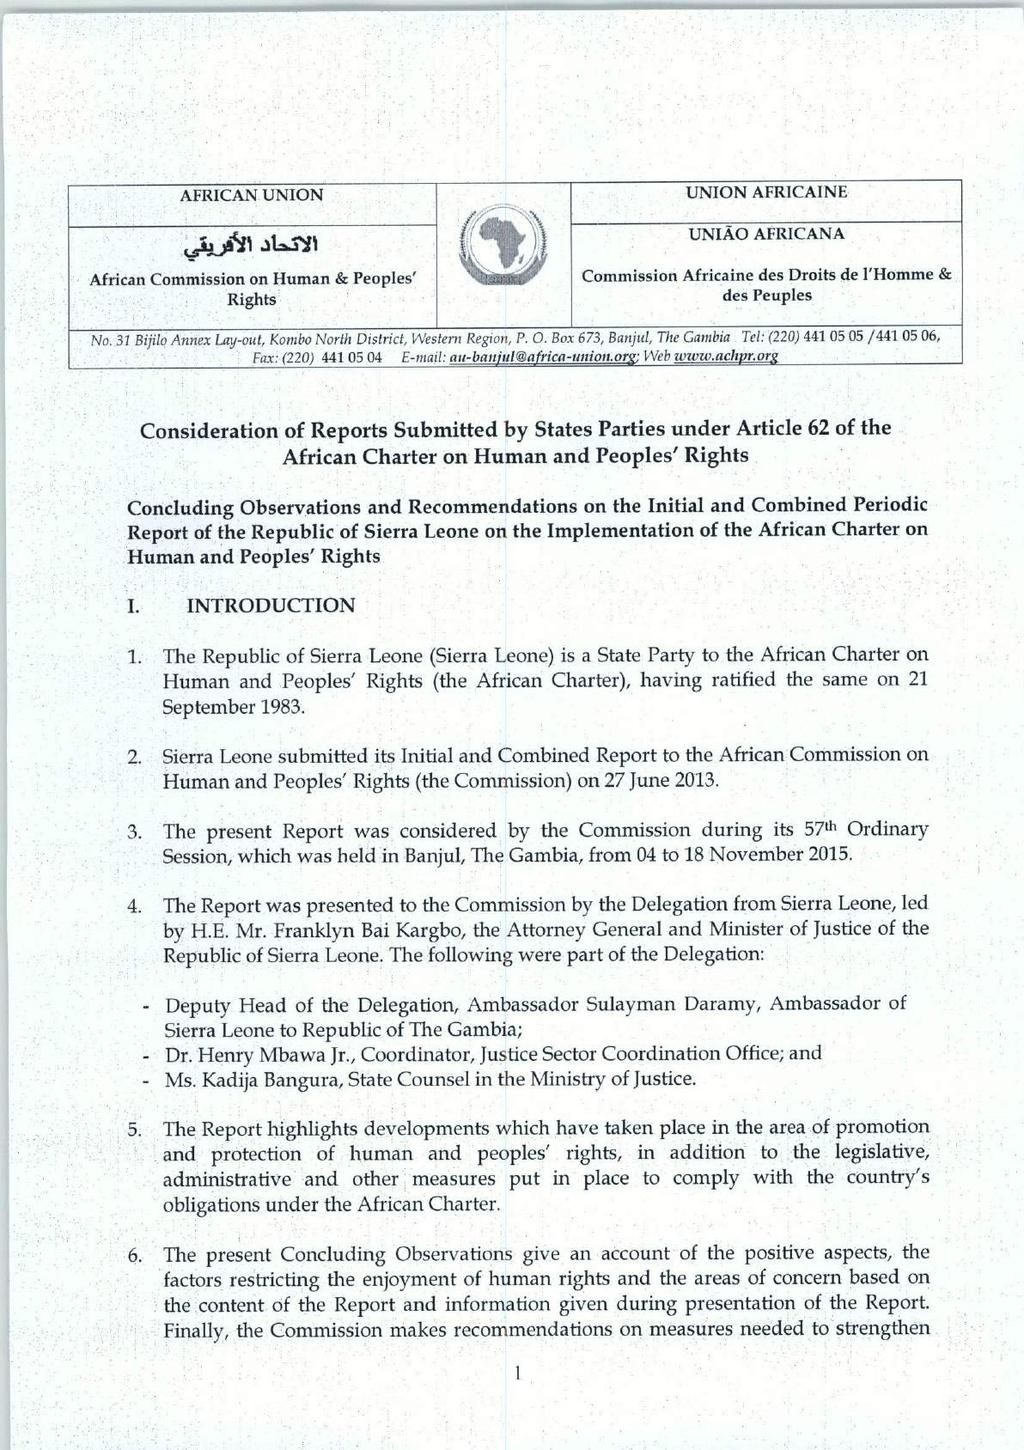 AFRICAN UNION j3jtfn juhi African Commission on Human & Peoples' Rights UNION AFRICAINE UNIAO AFRICANA Commission Africaine des Droits de l'homme & des Peuples No.